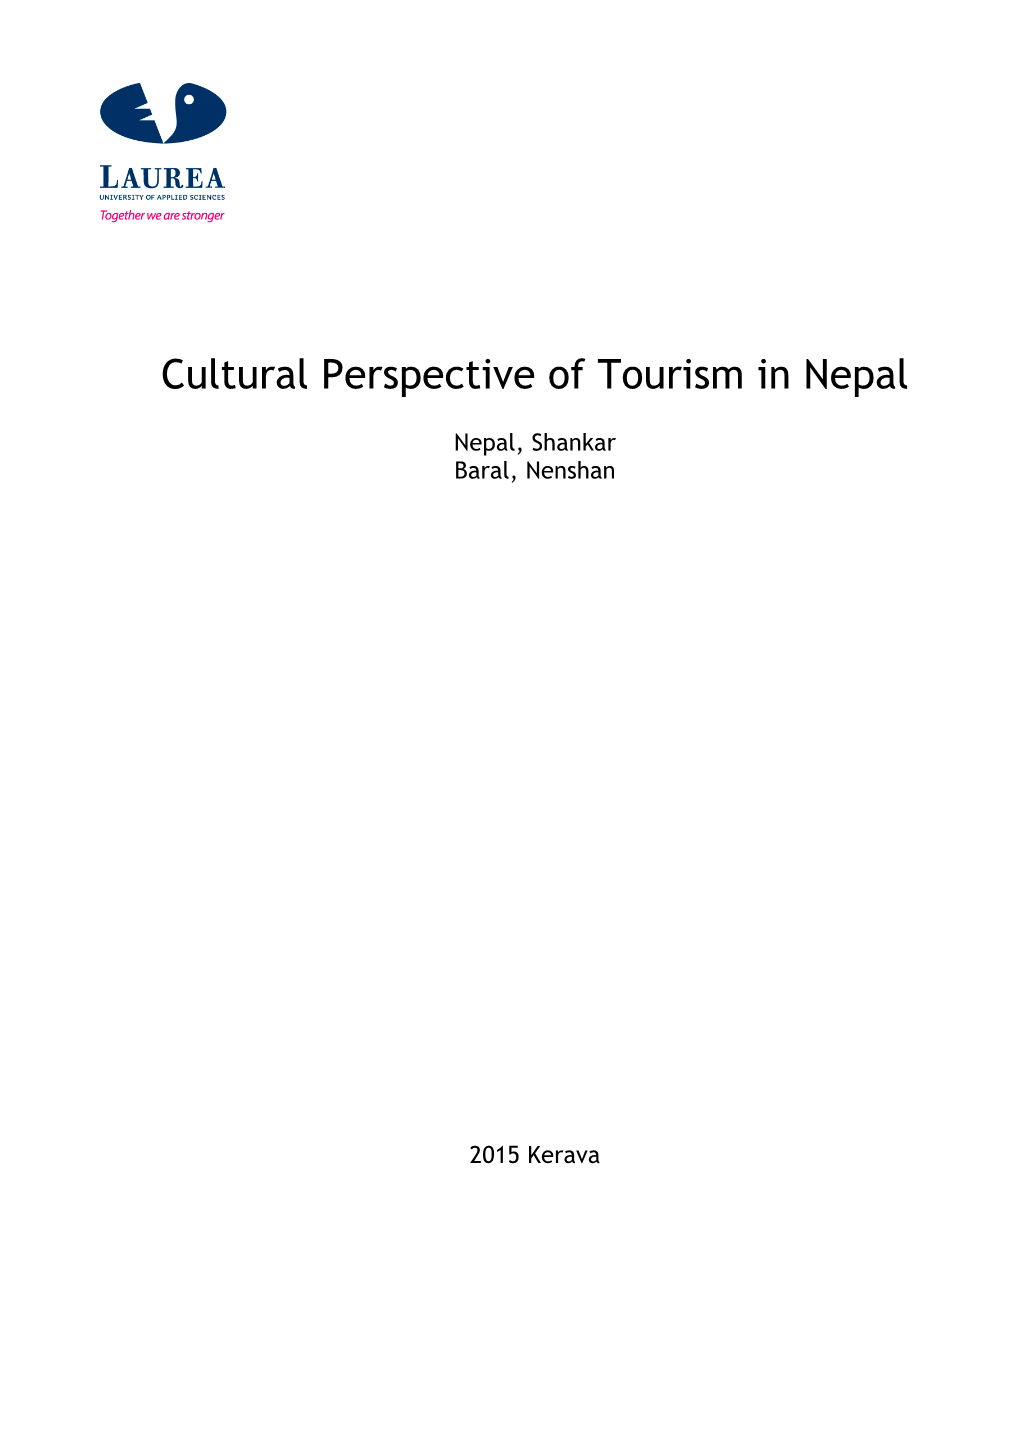 Cultural Perspective of Tourism in Nepal